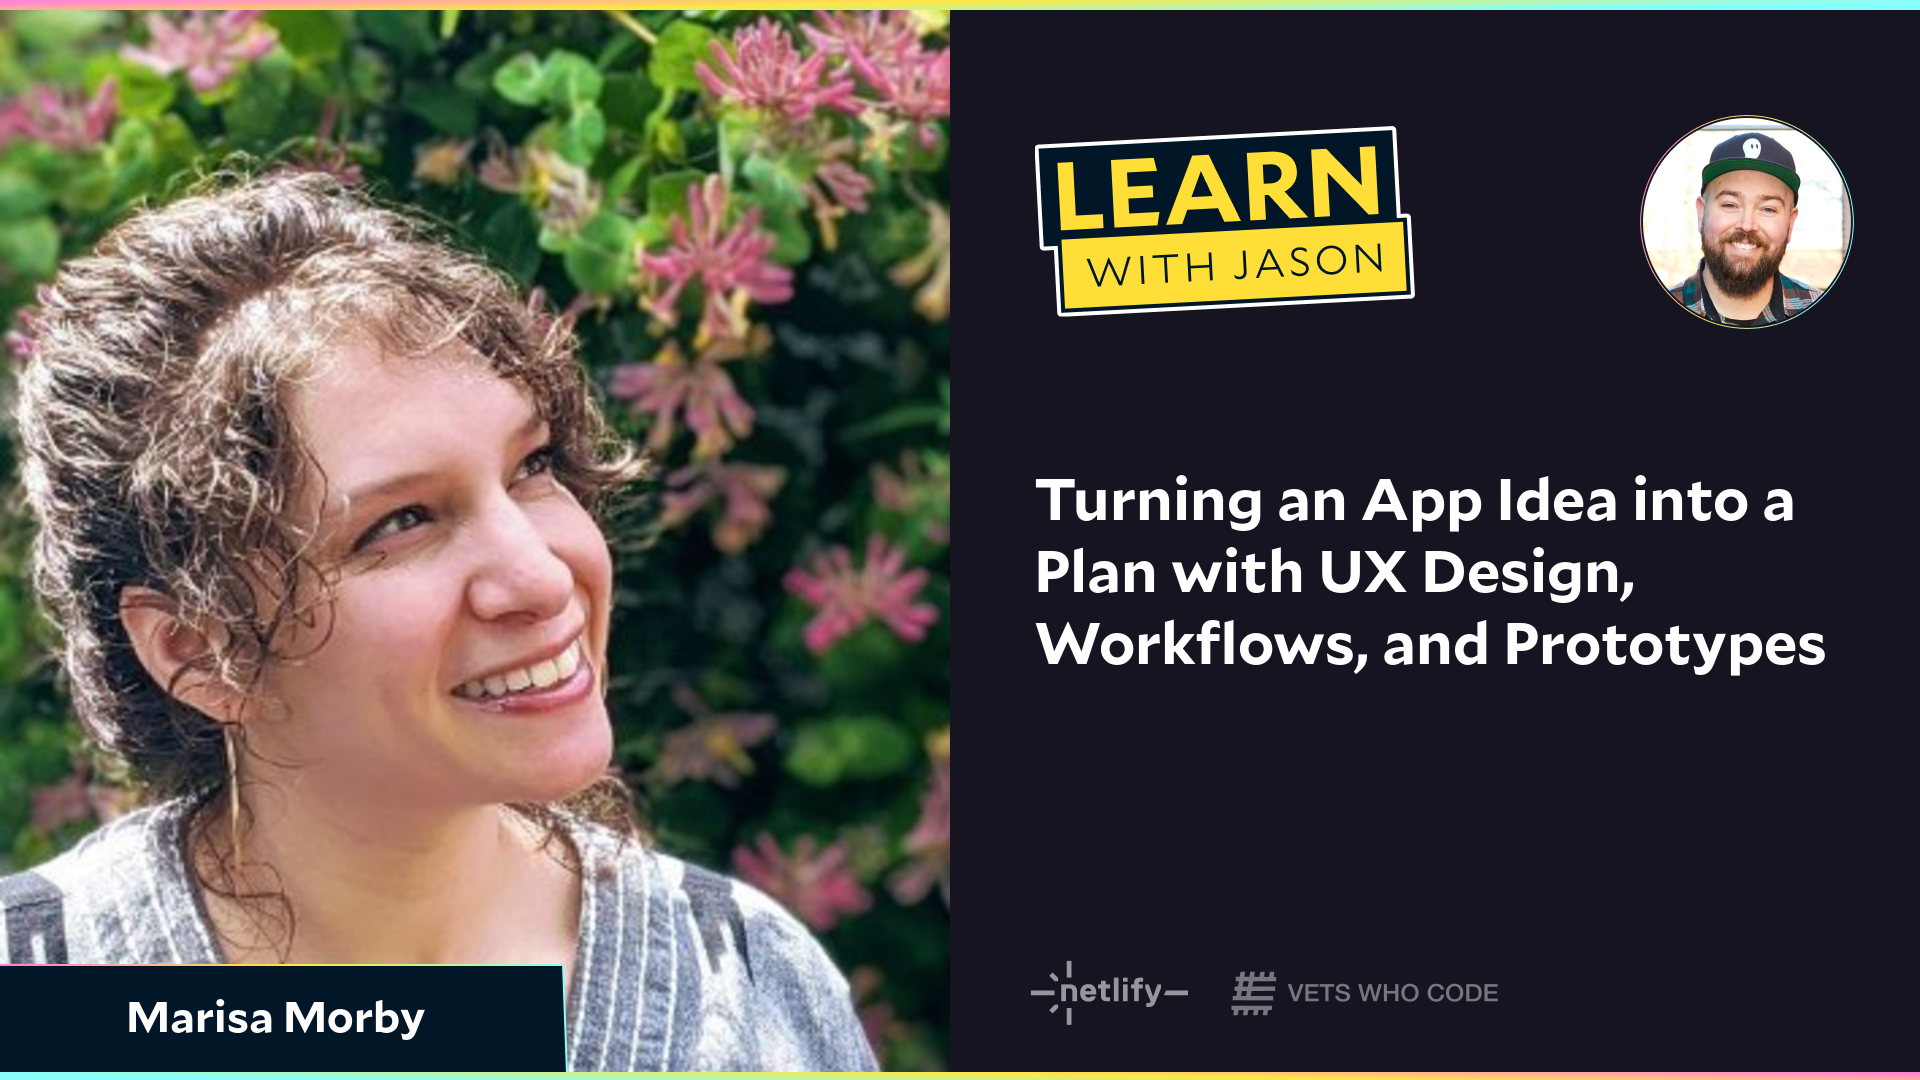 Turning an App Idea into a Plan with UX Design, Workflows, and Prototypes (with Marisa Morby)